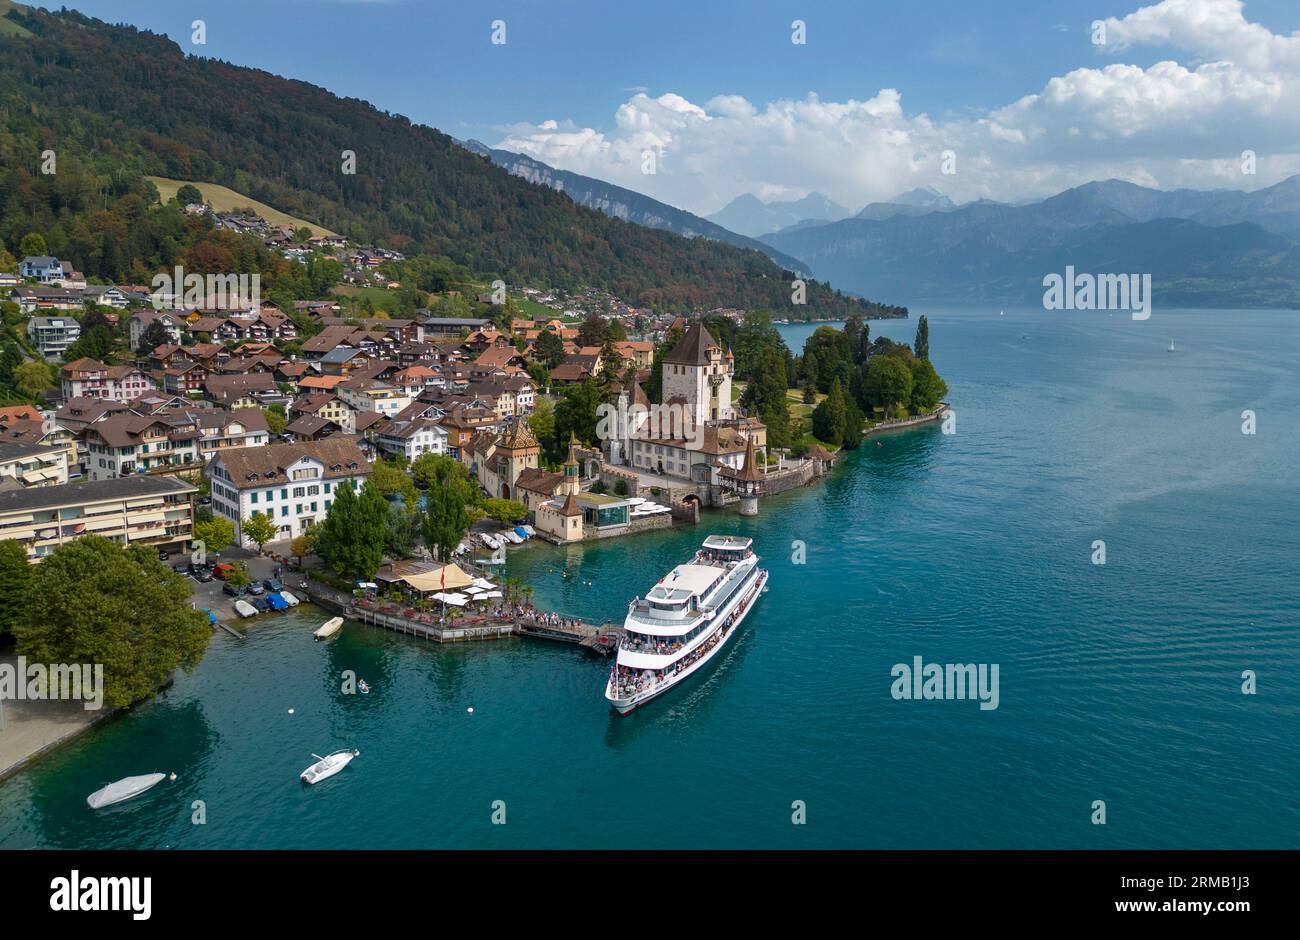 Aerial view of Berner Oberland cruise ship docking at Oberhofen Castle on the shore of Lake Thun, Canton of Bern, Switzerland. Stock Photo